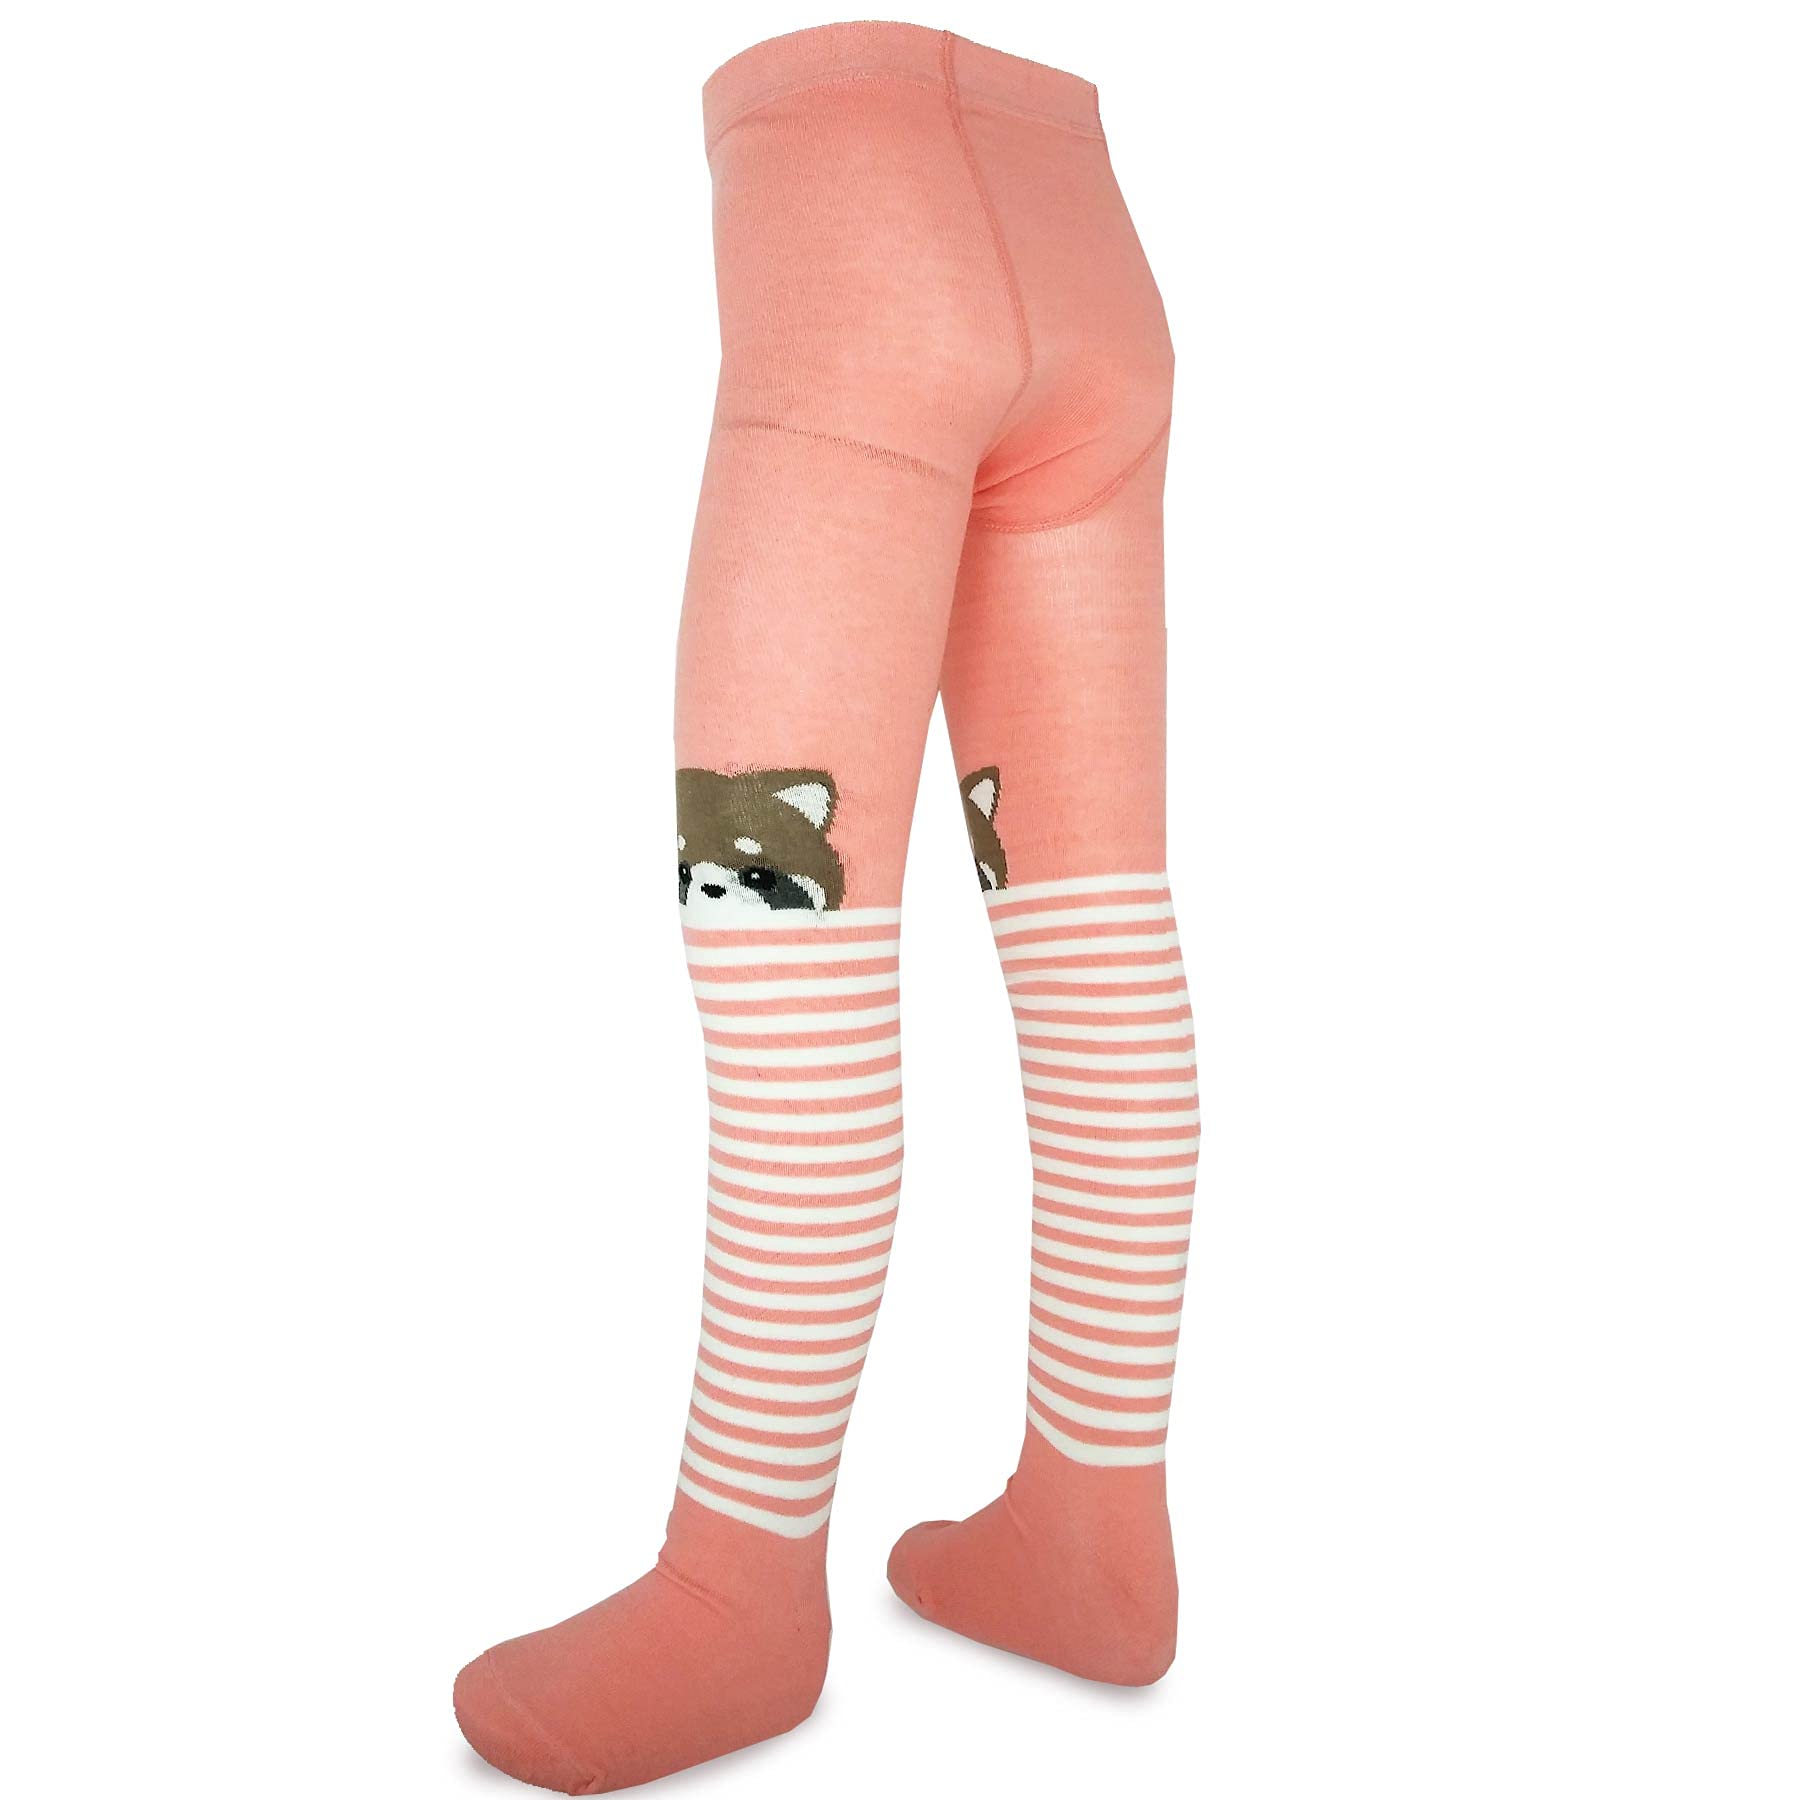 TeeHee Little Girls and Toddlers Fashion Tights 3 Pair Pack (T2101AST) –  TeeHee Socks